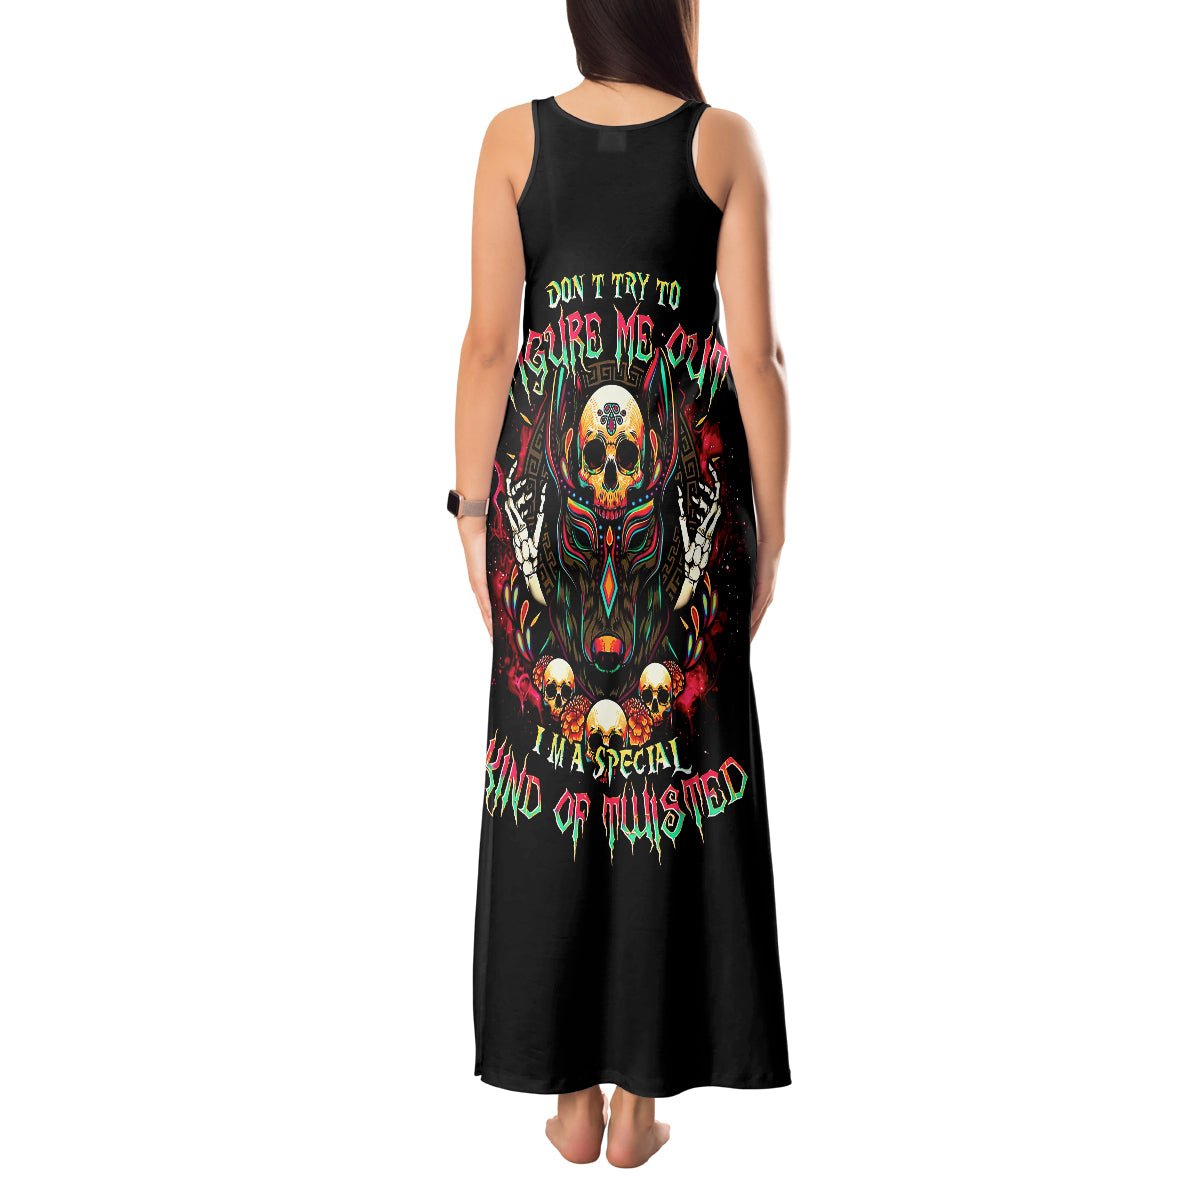 Anubis Skull Tank Maxi Dress Skull Anubis Don't Try To Figured Me Out DT01 - The Mazicc - Women - S - Black